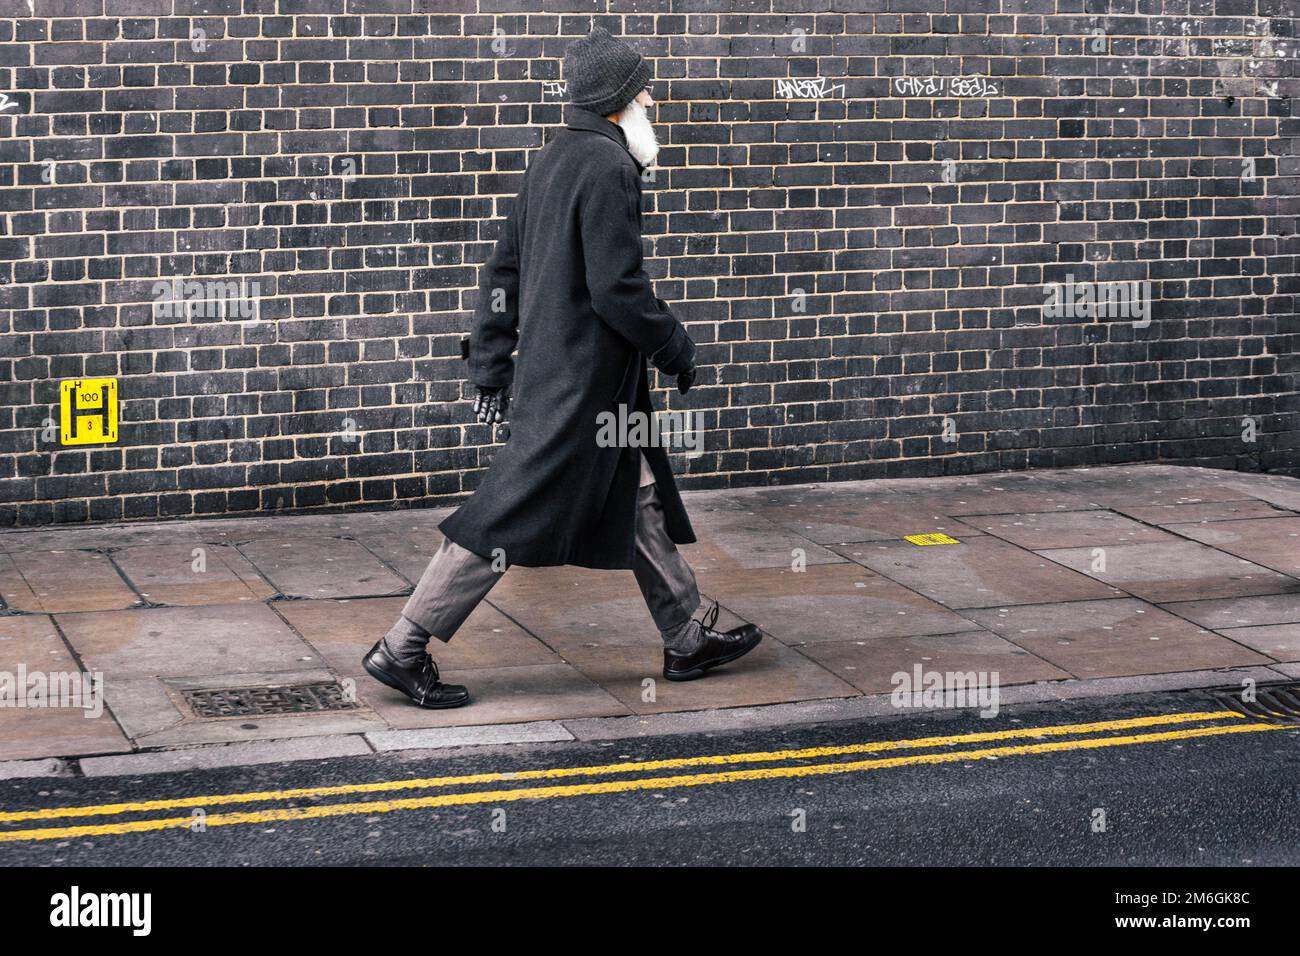 A stylish old, bearded man with a black coat walking briskly in front of a grungy black wall with yellow lines on the street. London, UK Stock Photo